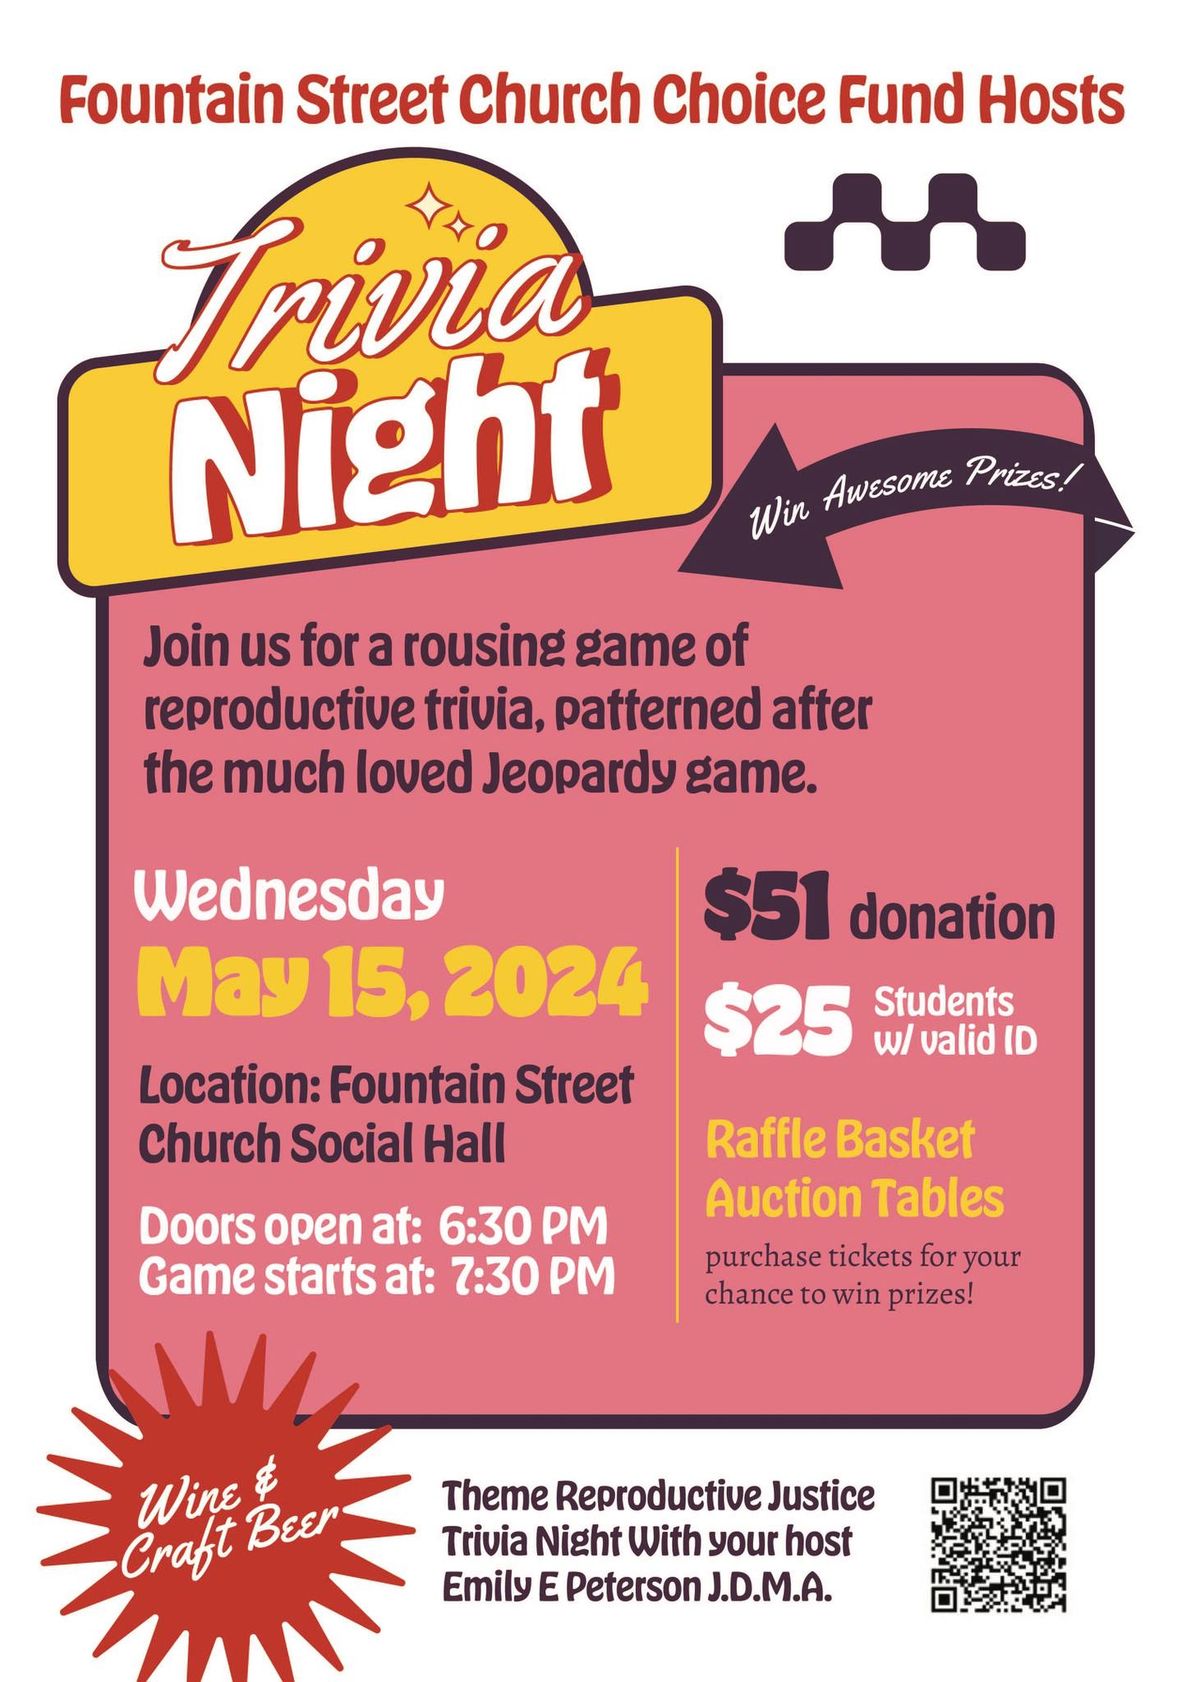 Fountain Street Church Choice Fund Fundraiser - Reproductive Justice Trivia Night